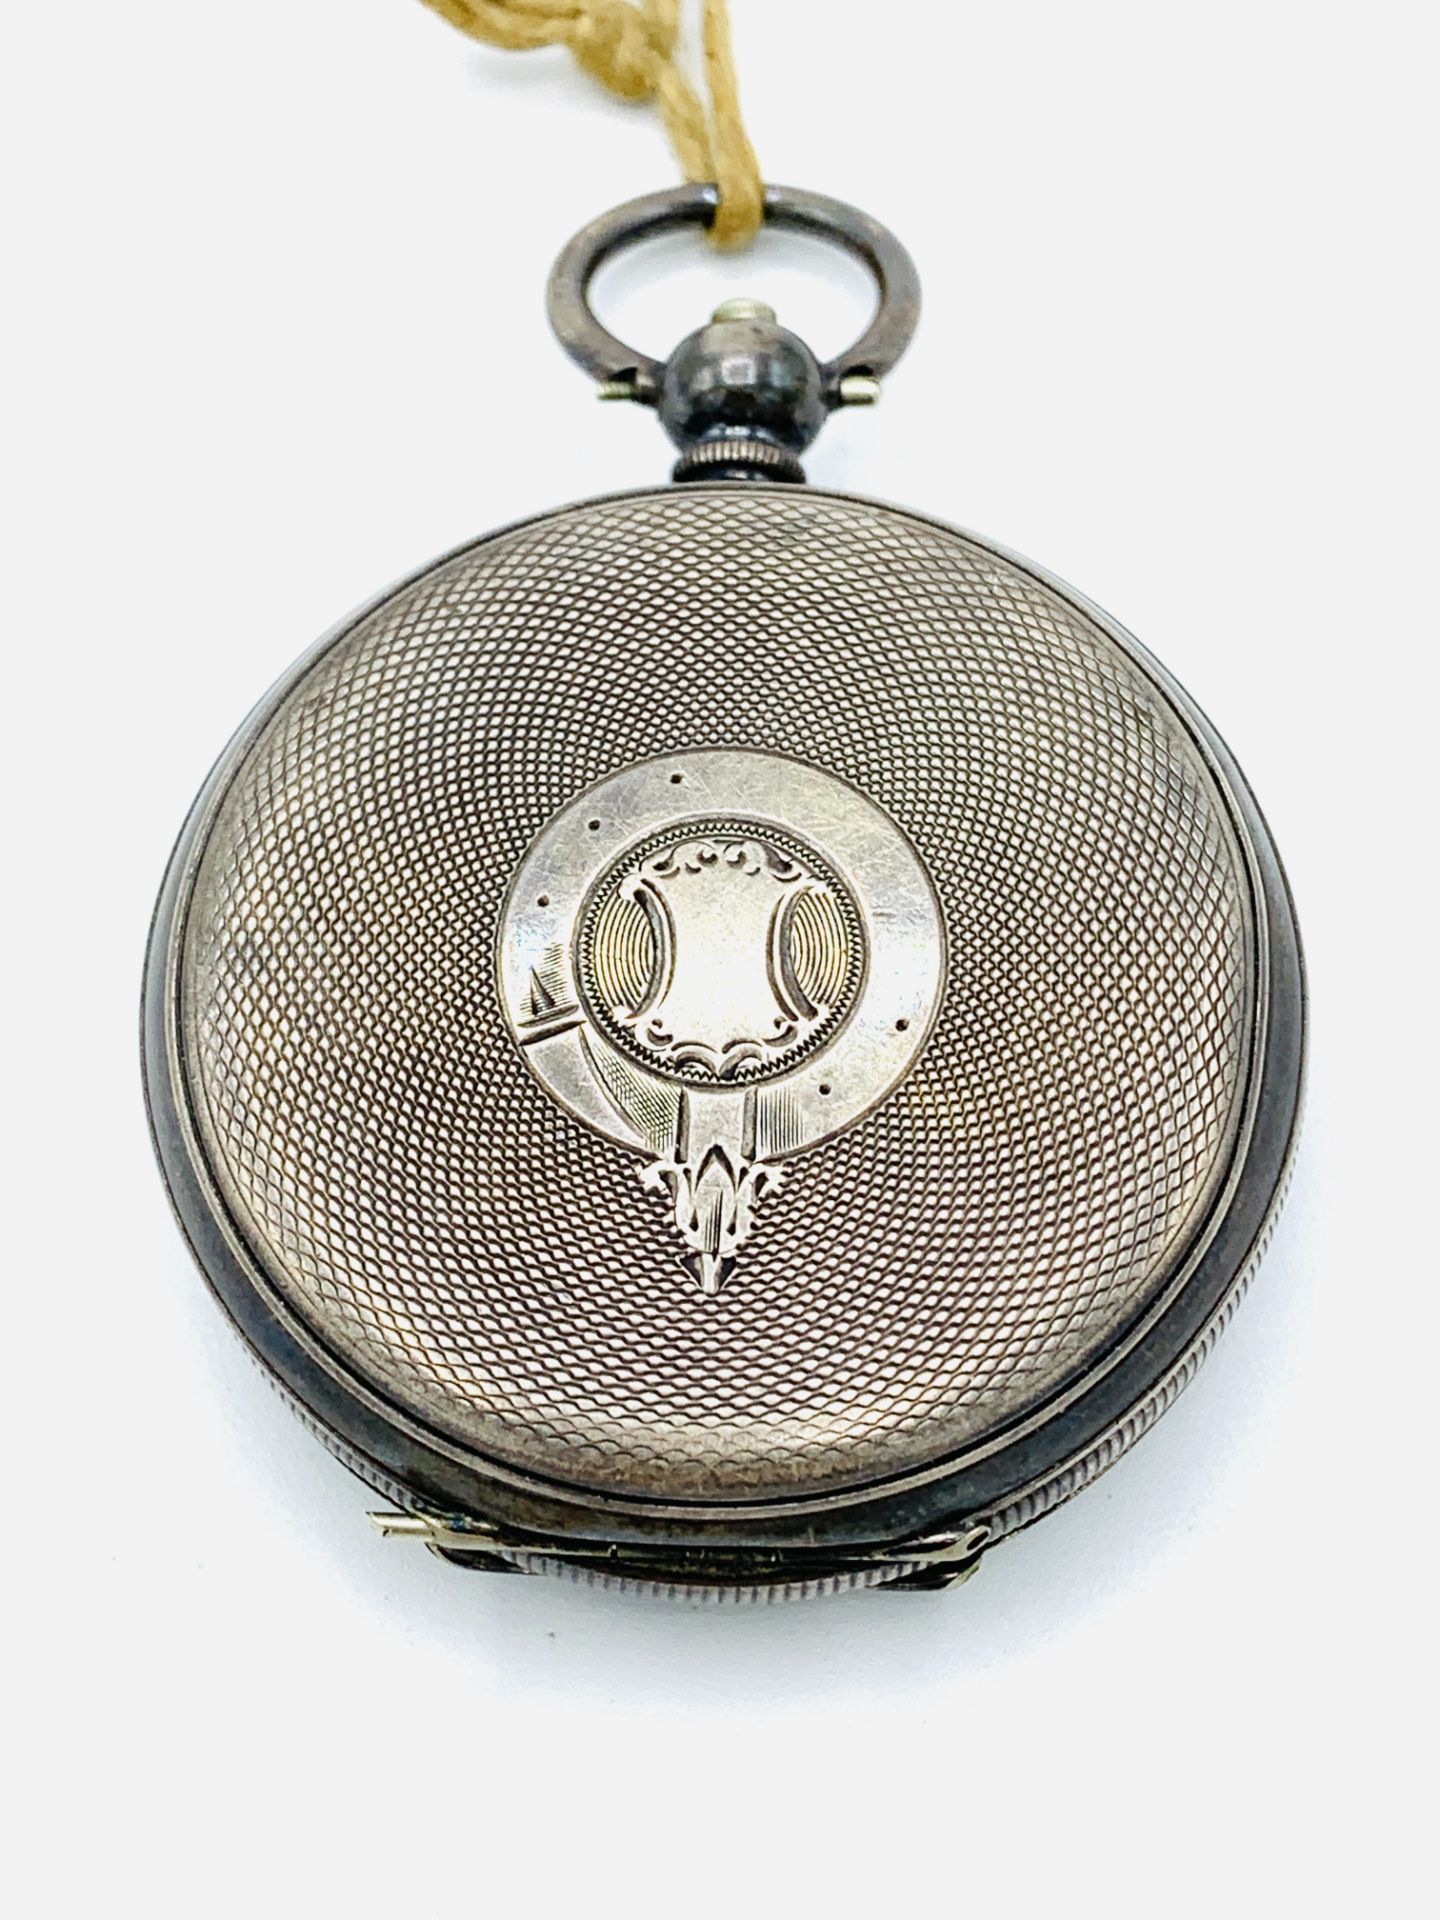 Silver cased pocket watch by A G Masgall, The Ideal, Middlesbrough - Image 5 of 5